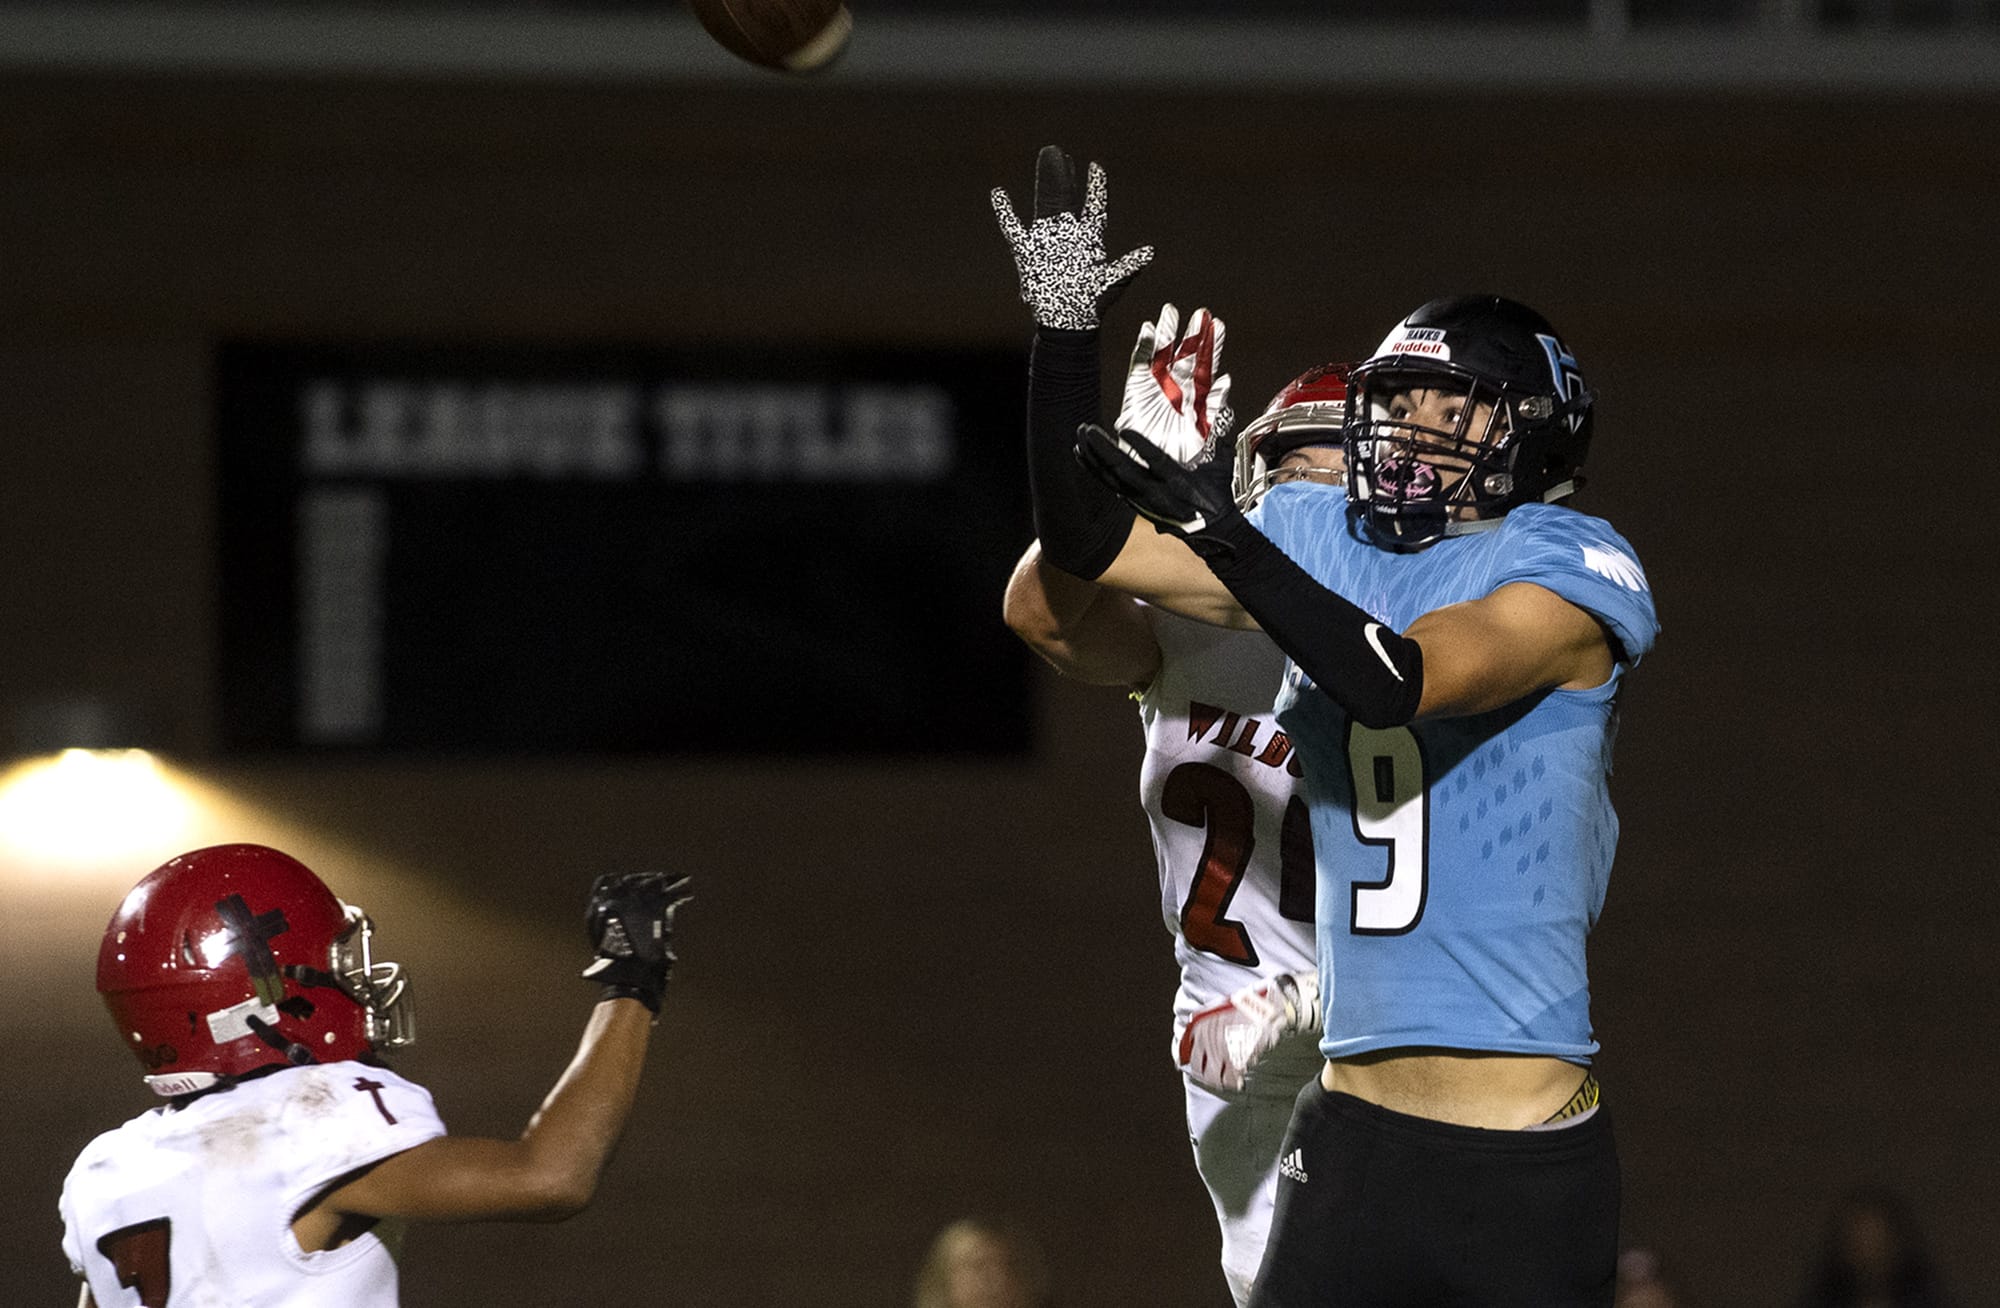 HockinsonÕs Peyton Brammer (9) catches a pass from Levi Crum to score the HawkÕs third touchdown of the night during Friday nightÕs game in Hockinson on Sept. 13, 2019. The HawkÕs lost 21-27.